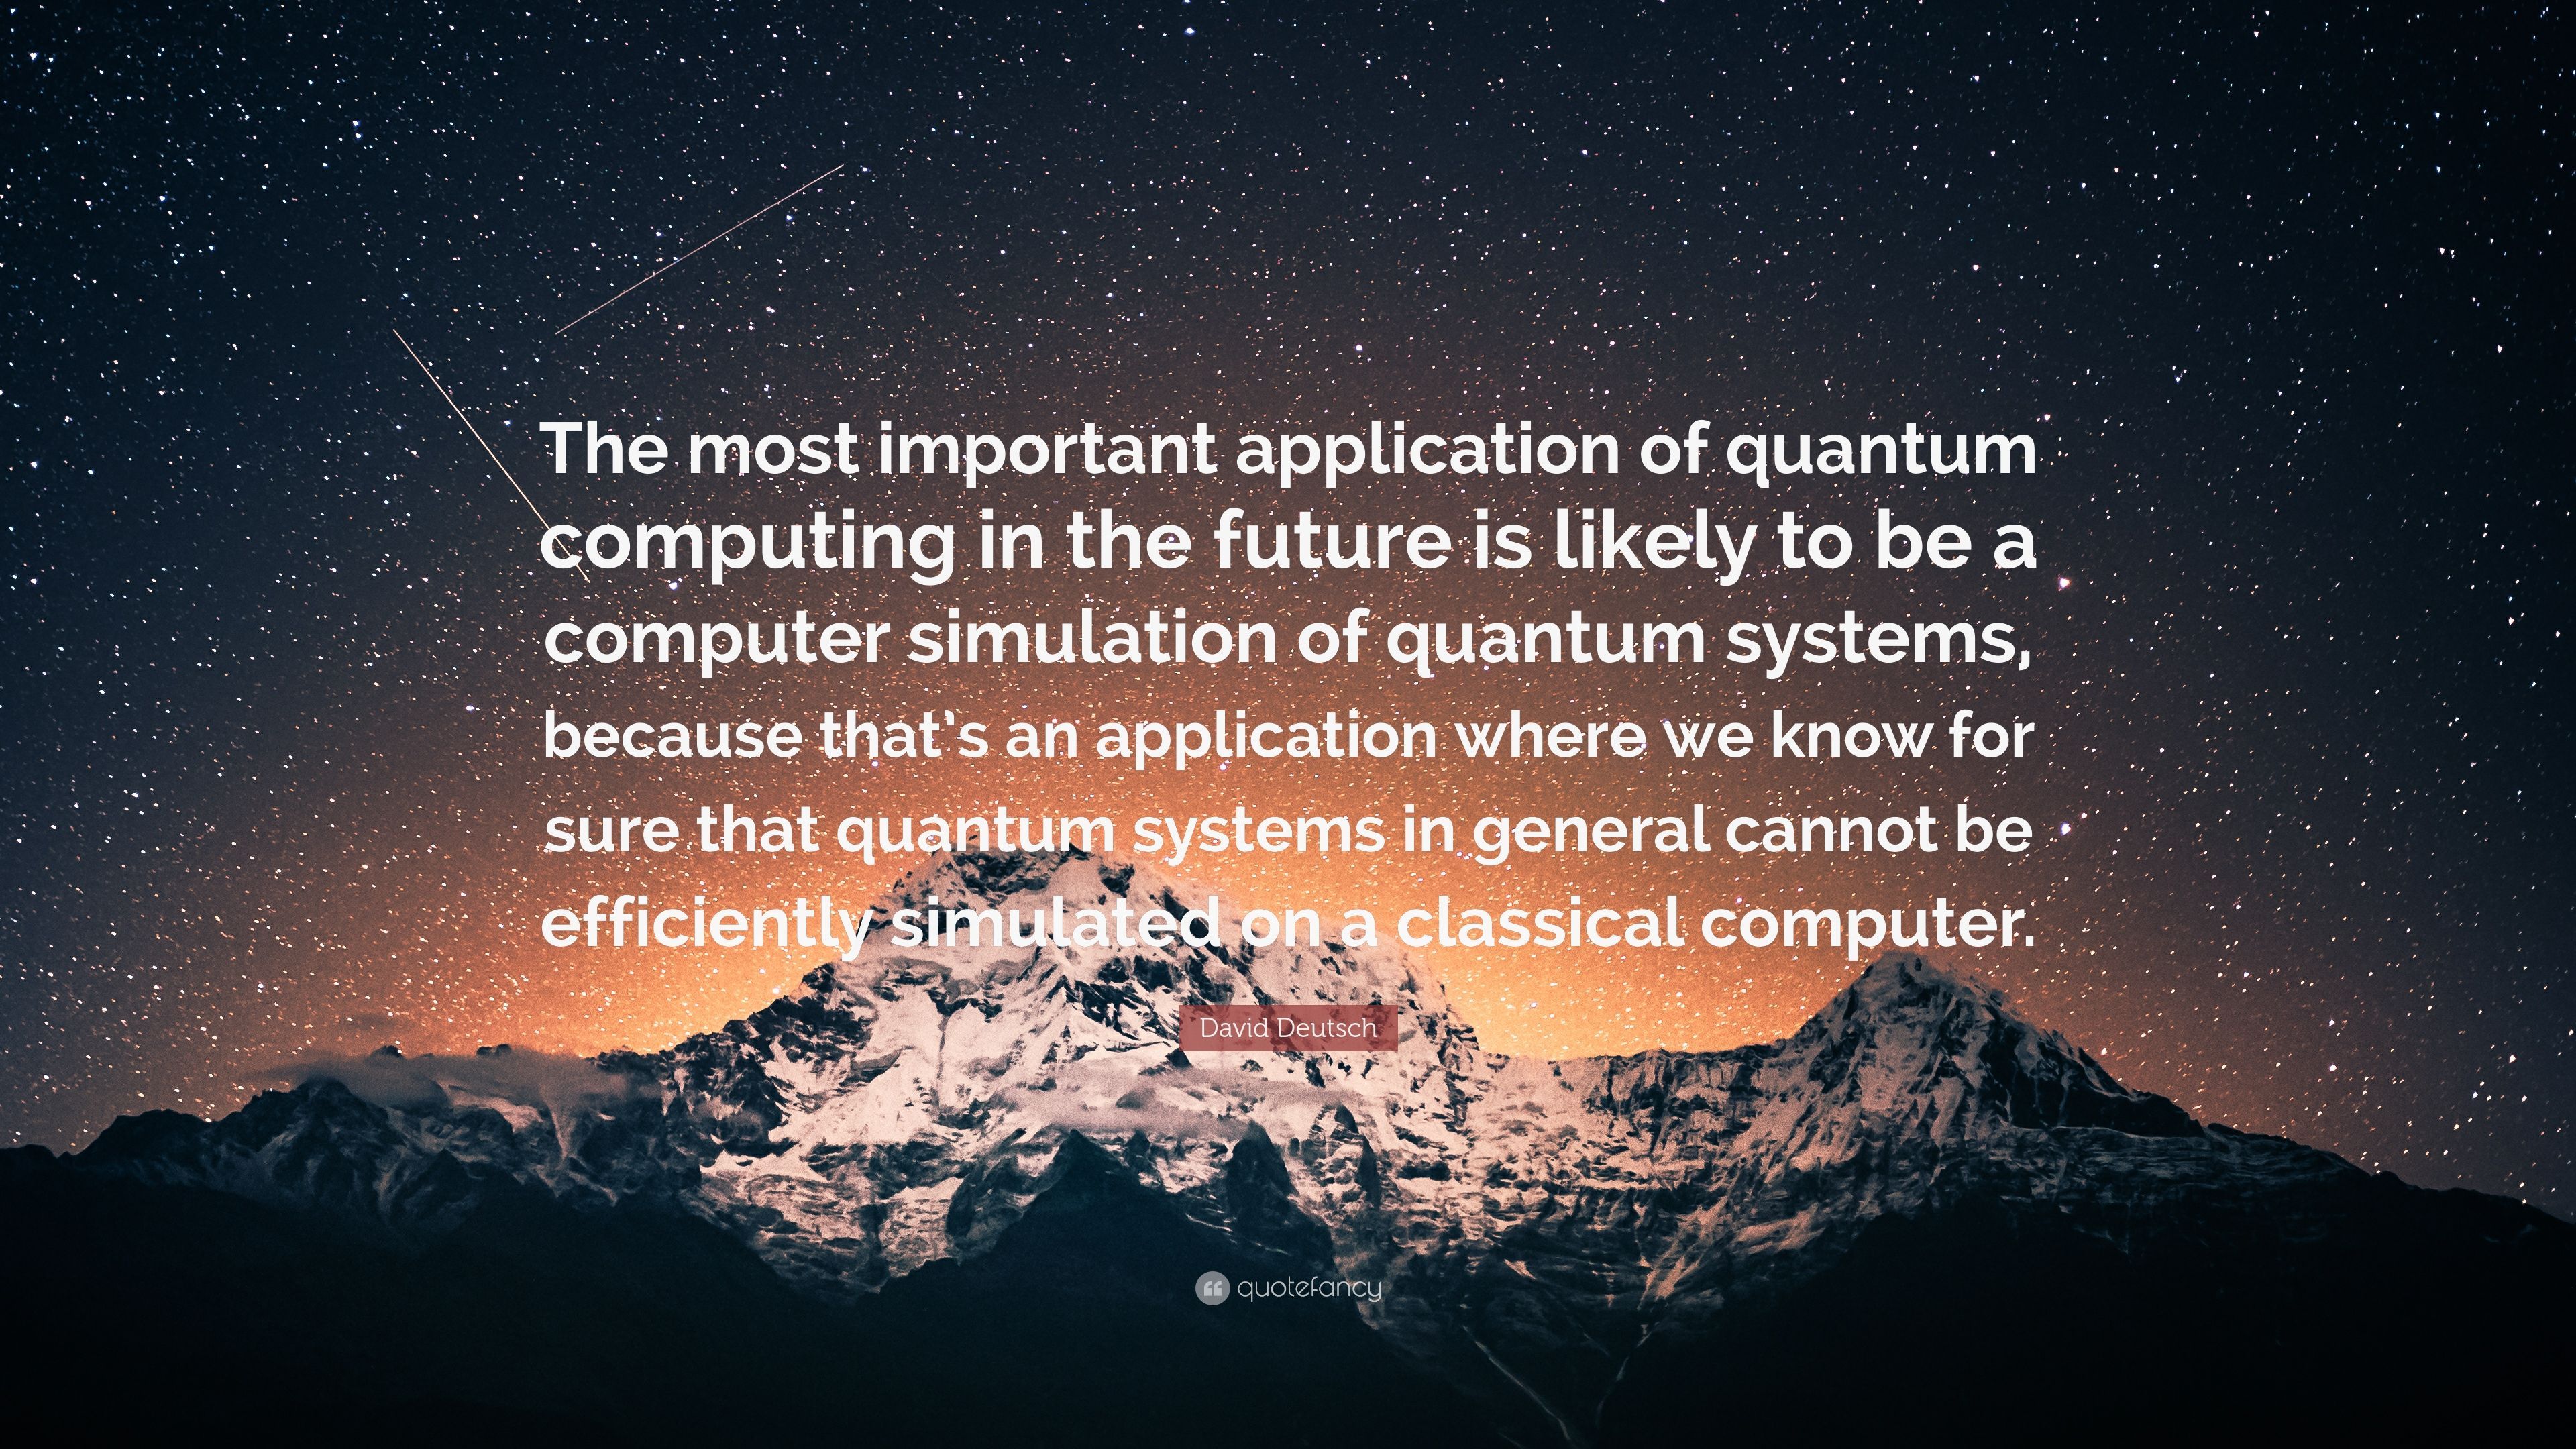 David Deutsch Quote: “The most important application of quantum computing in the future is likely to be a computer simulation of quantum syste.”